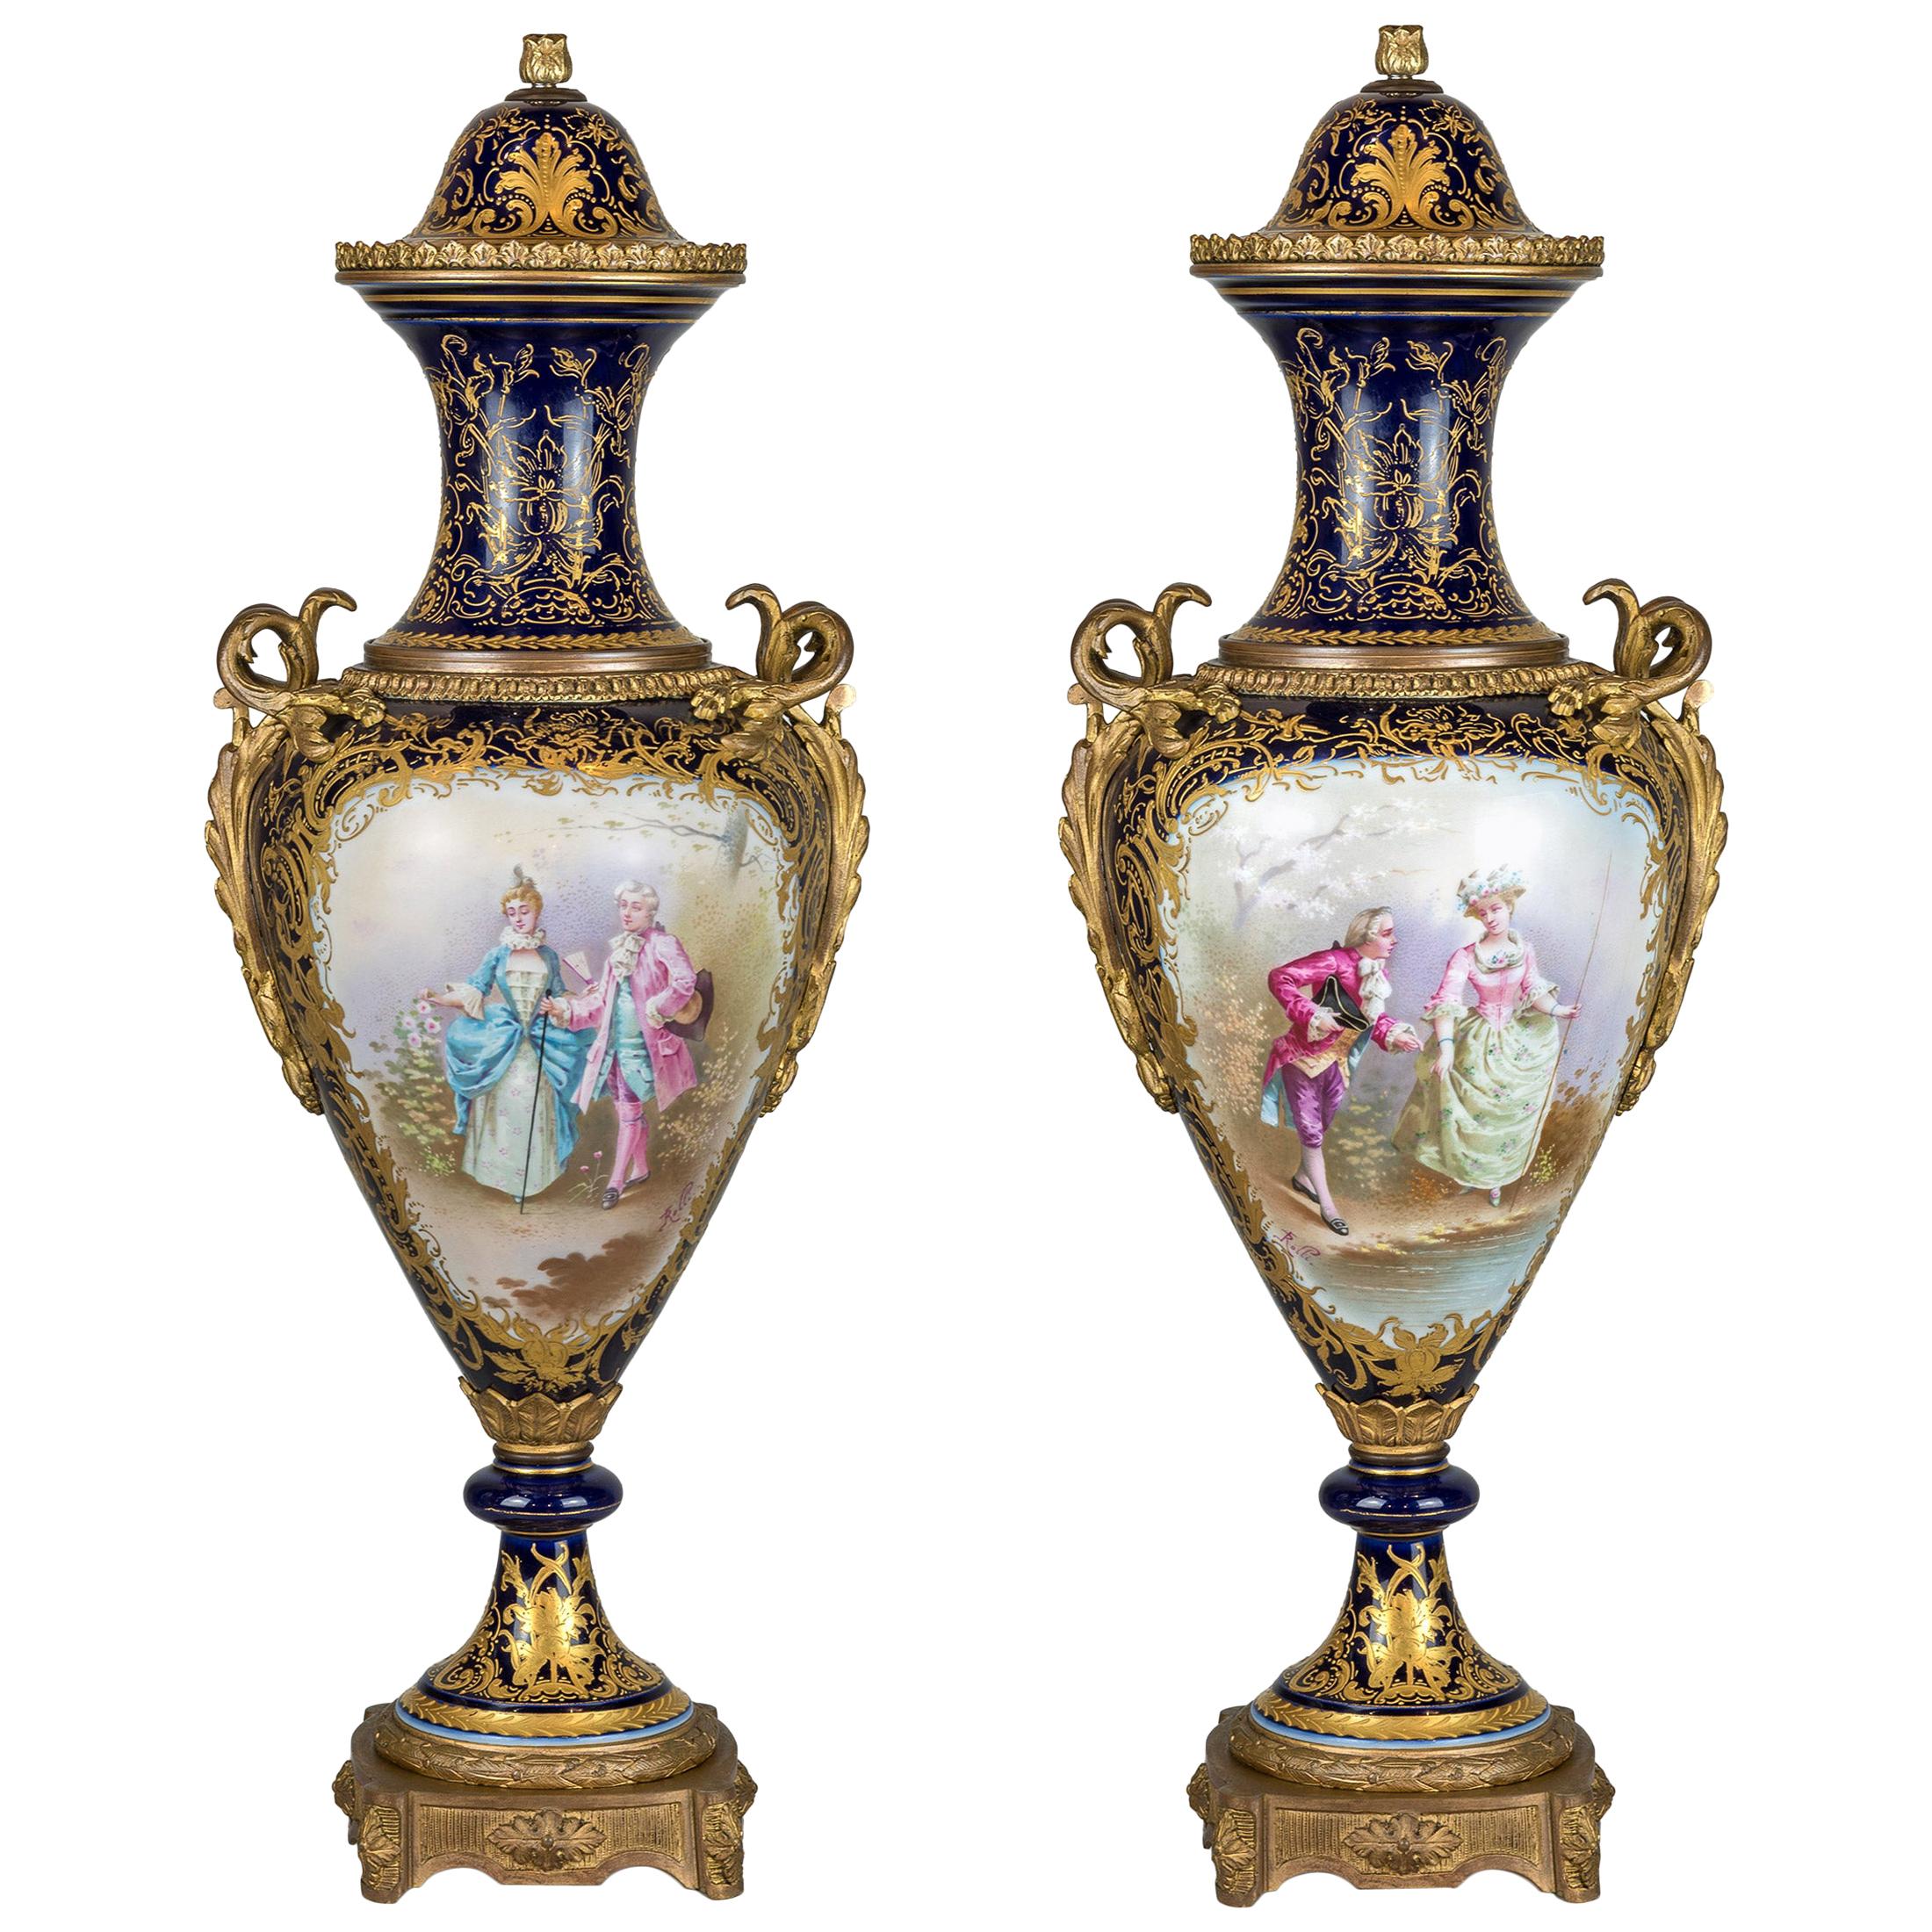 Fine Quality Pair of Ormolu Mounted Sèvres Porcelain Vase and Cover